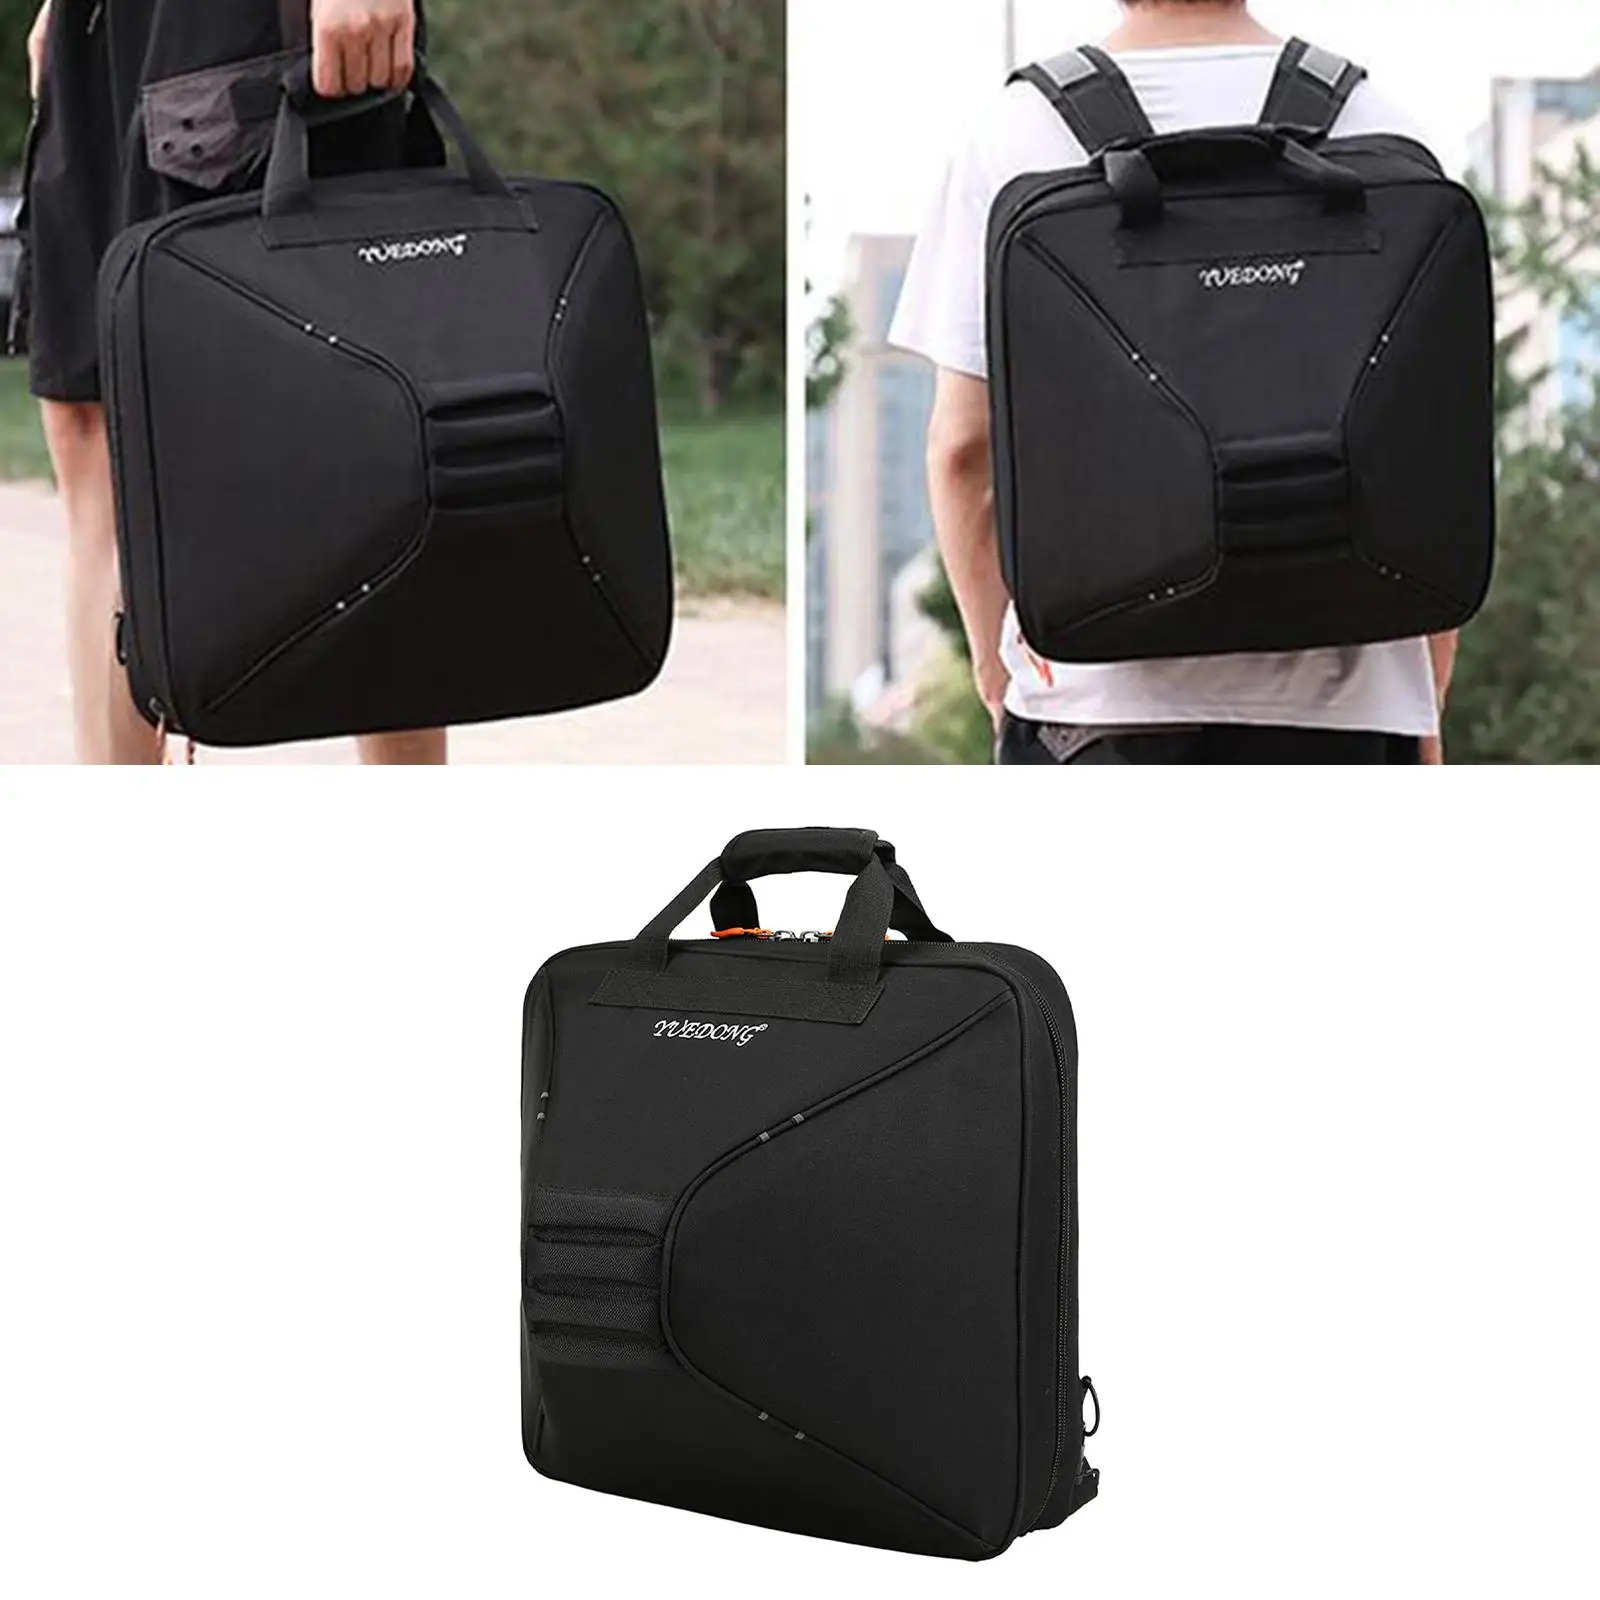 French Bag Thickened Black Parts Accessories Hard for Gig